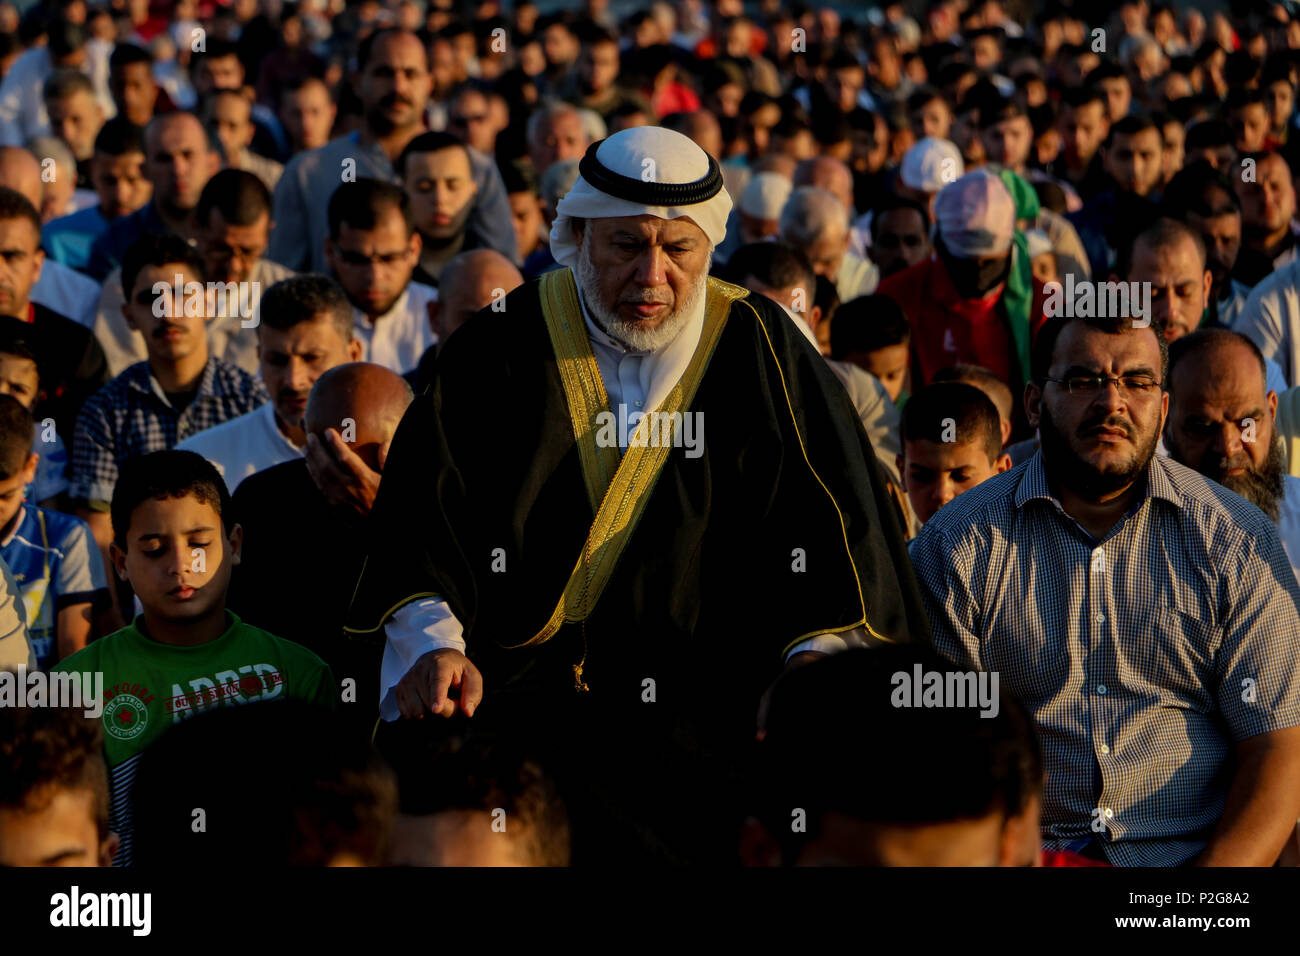 June 15, 2018 - Palestinian Muslims in Gaza celebrate Eid al-Fitr in the 'Return'' refugee camp along the eastern Gaza border, marking the end of the fasting month of Ramadan. Hamas political bureau chief, Ismail Haniya, and Hamas senior leader, Dr Khalil Al-Hayia, attended the al-Fitr celebrations and performed the Eid al-Fitr prayers alongside the other worshippers in the camp's open square. The 'Return'' refugee camp is located in the northeast of Gaza, close to the Nahal Oz border crossing. Eid al-Fitr is an important religious holiday for Muslims worldwide and it marks the end of Stock Photo